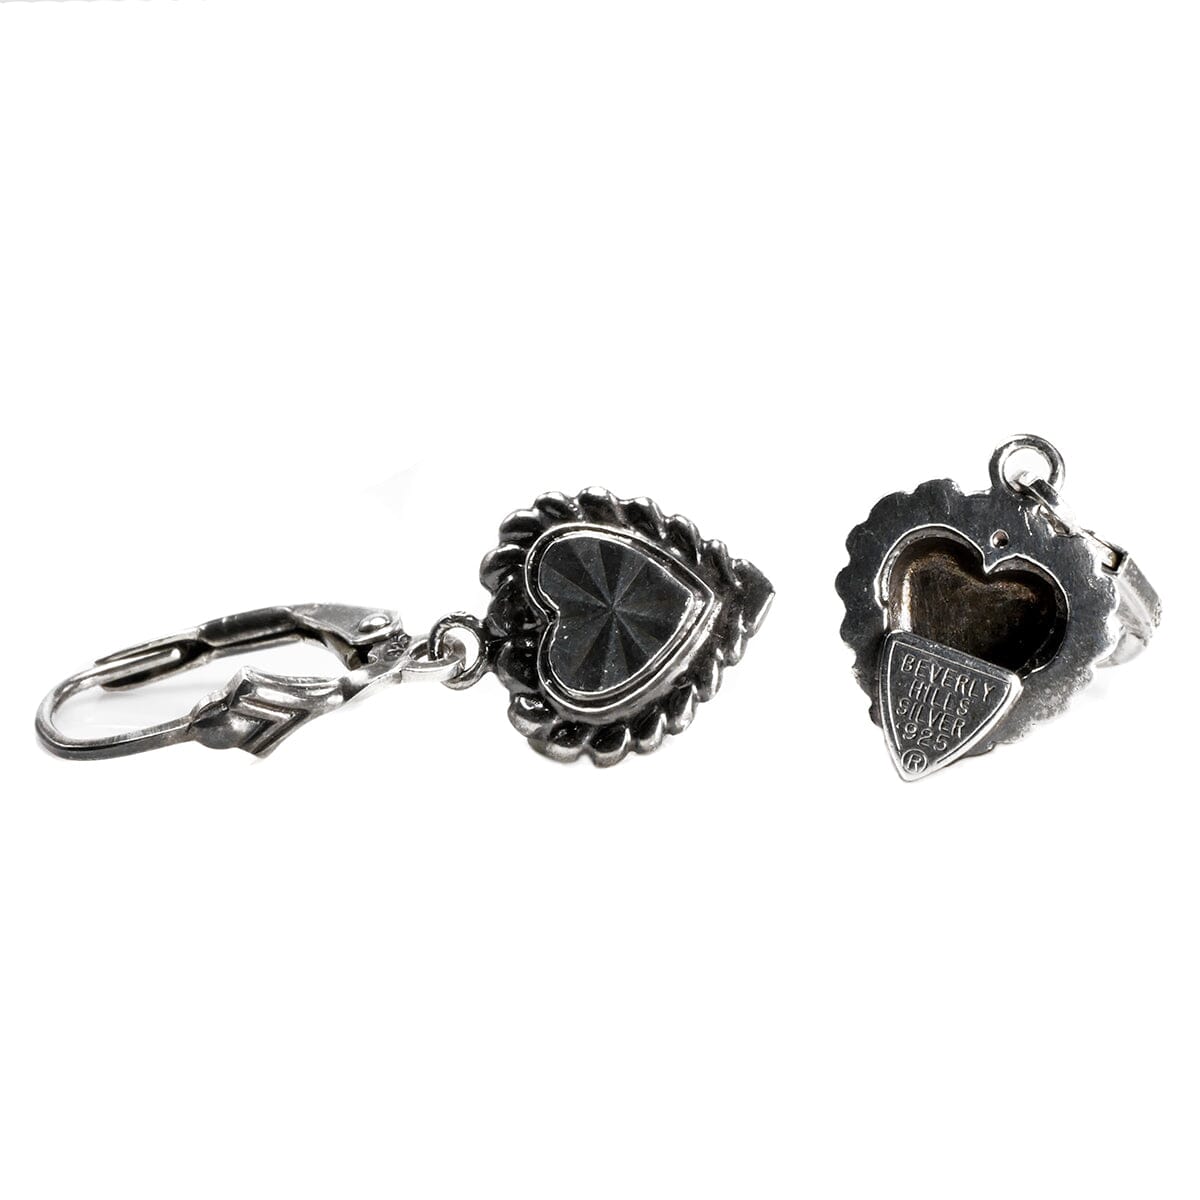 Great Lakes Boutique Beverly Hills Silver Heart Earrings